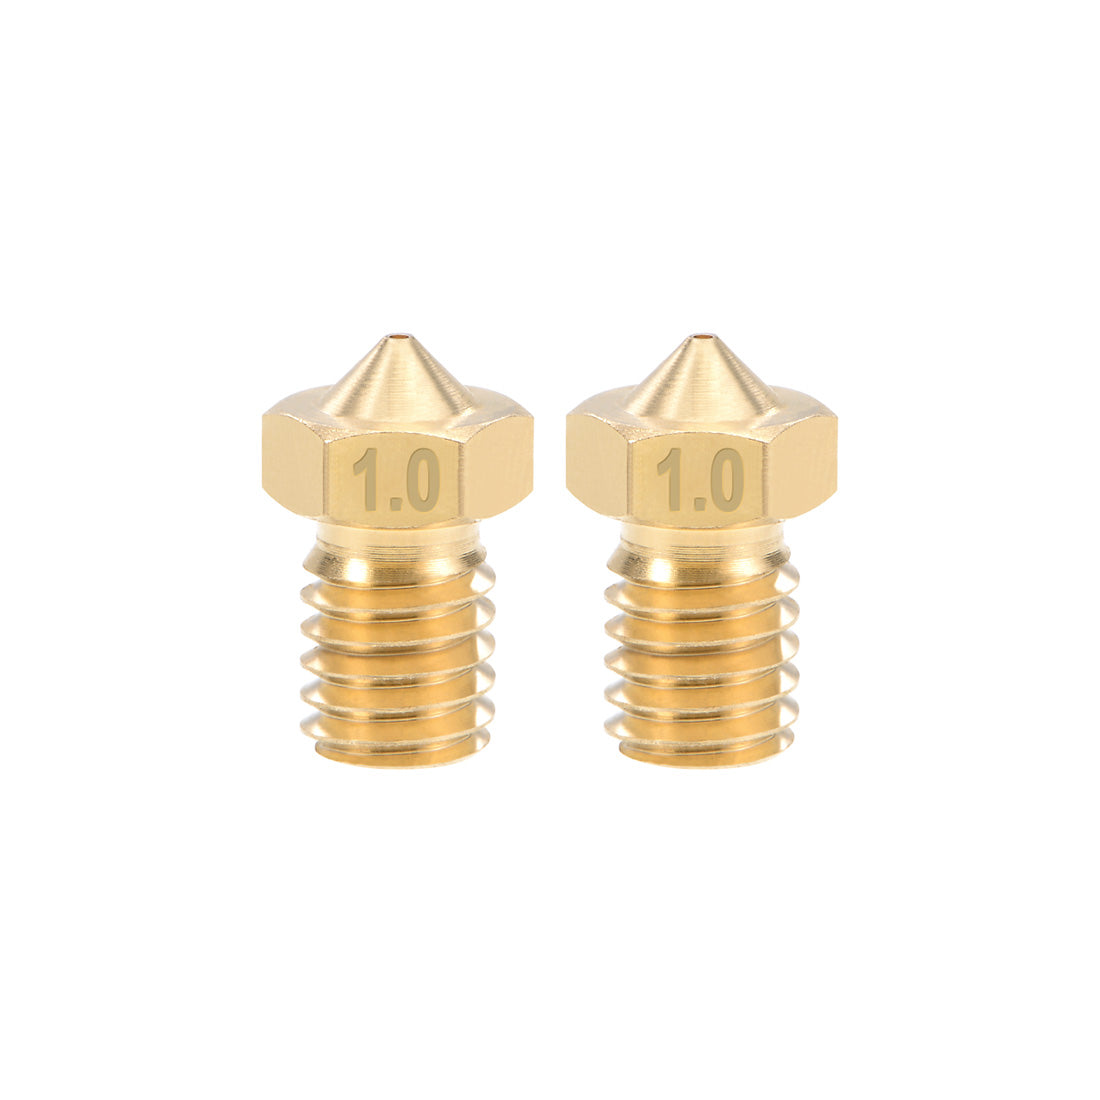 uxcell Uxcell 1mm 3D Printer Nozzle Head M6 for V5 V6 1.75mm Extruder Print, Brass 2pcs